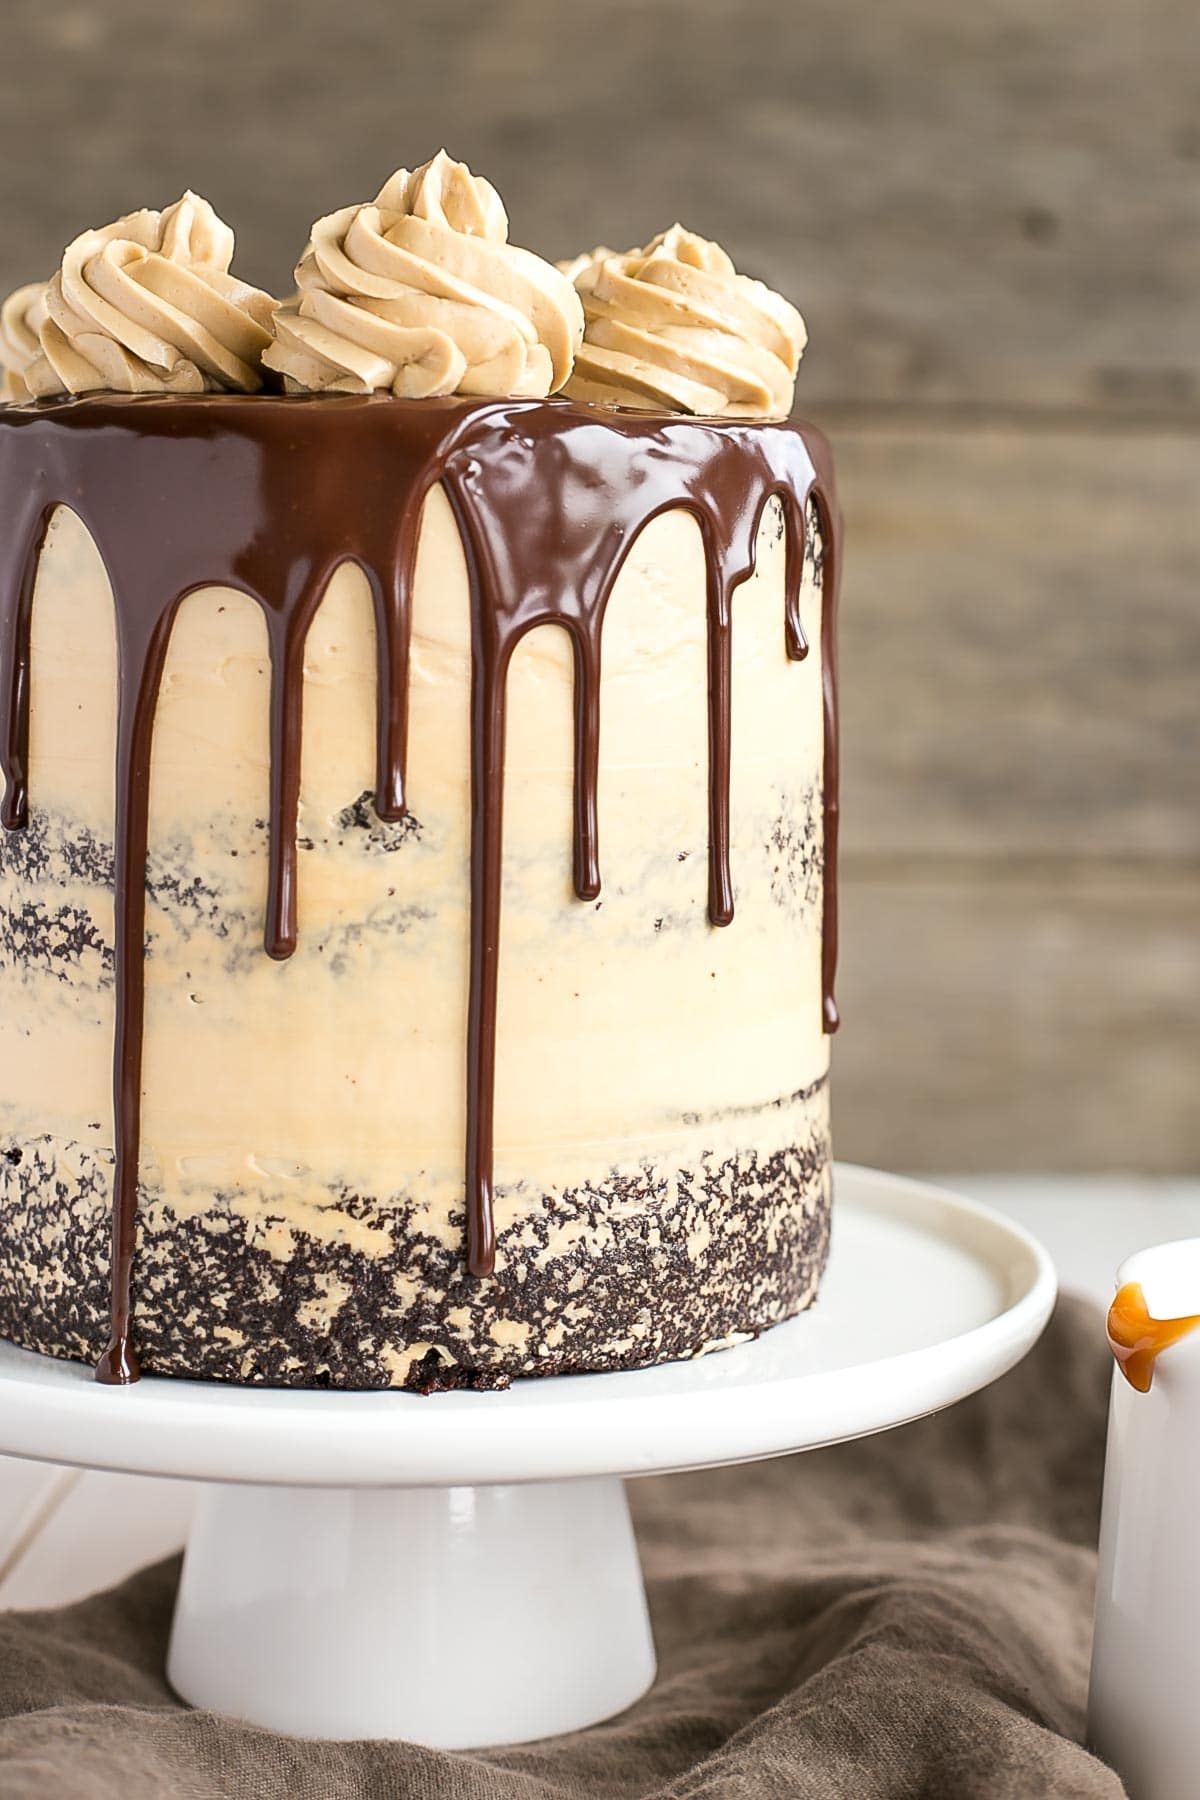 The ultimate combo of chocolate and caramel come together in this delicious Chocolate Dulce de Leche Cake. | livforcake.com